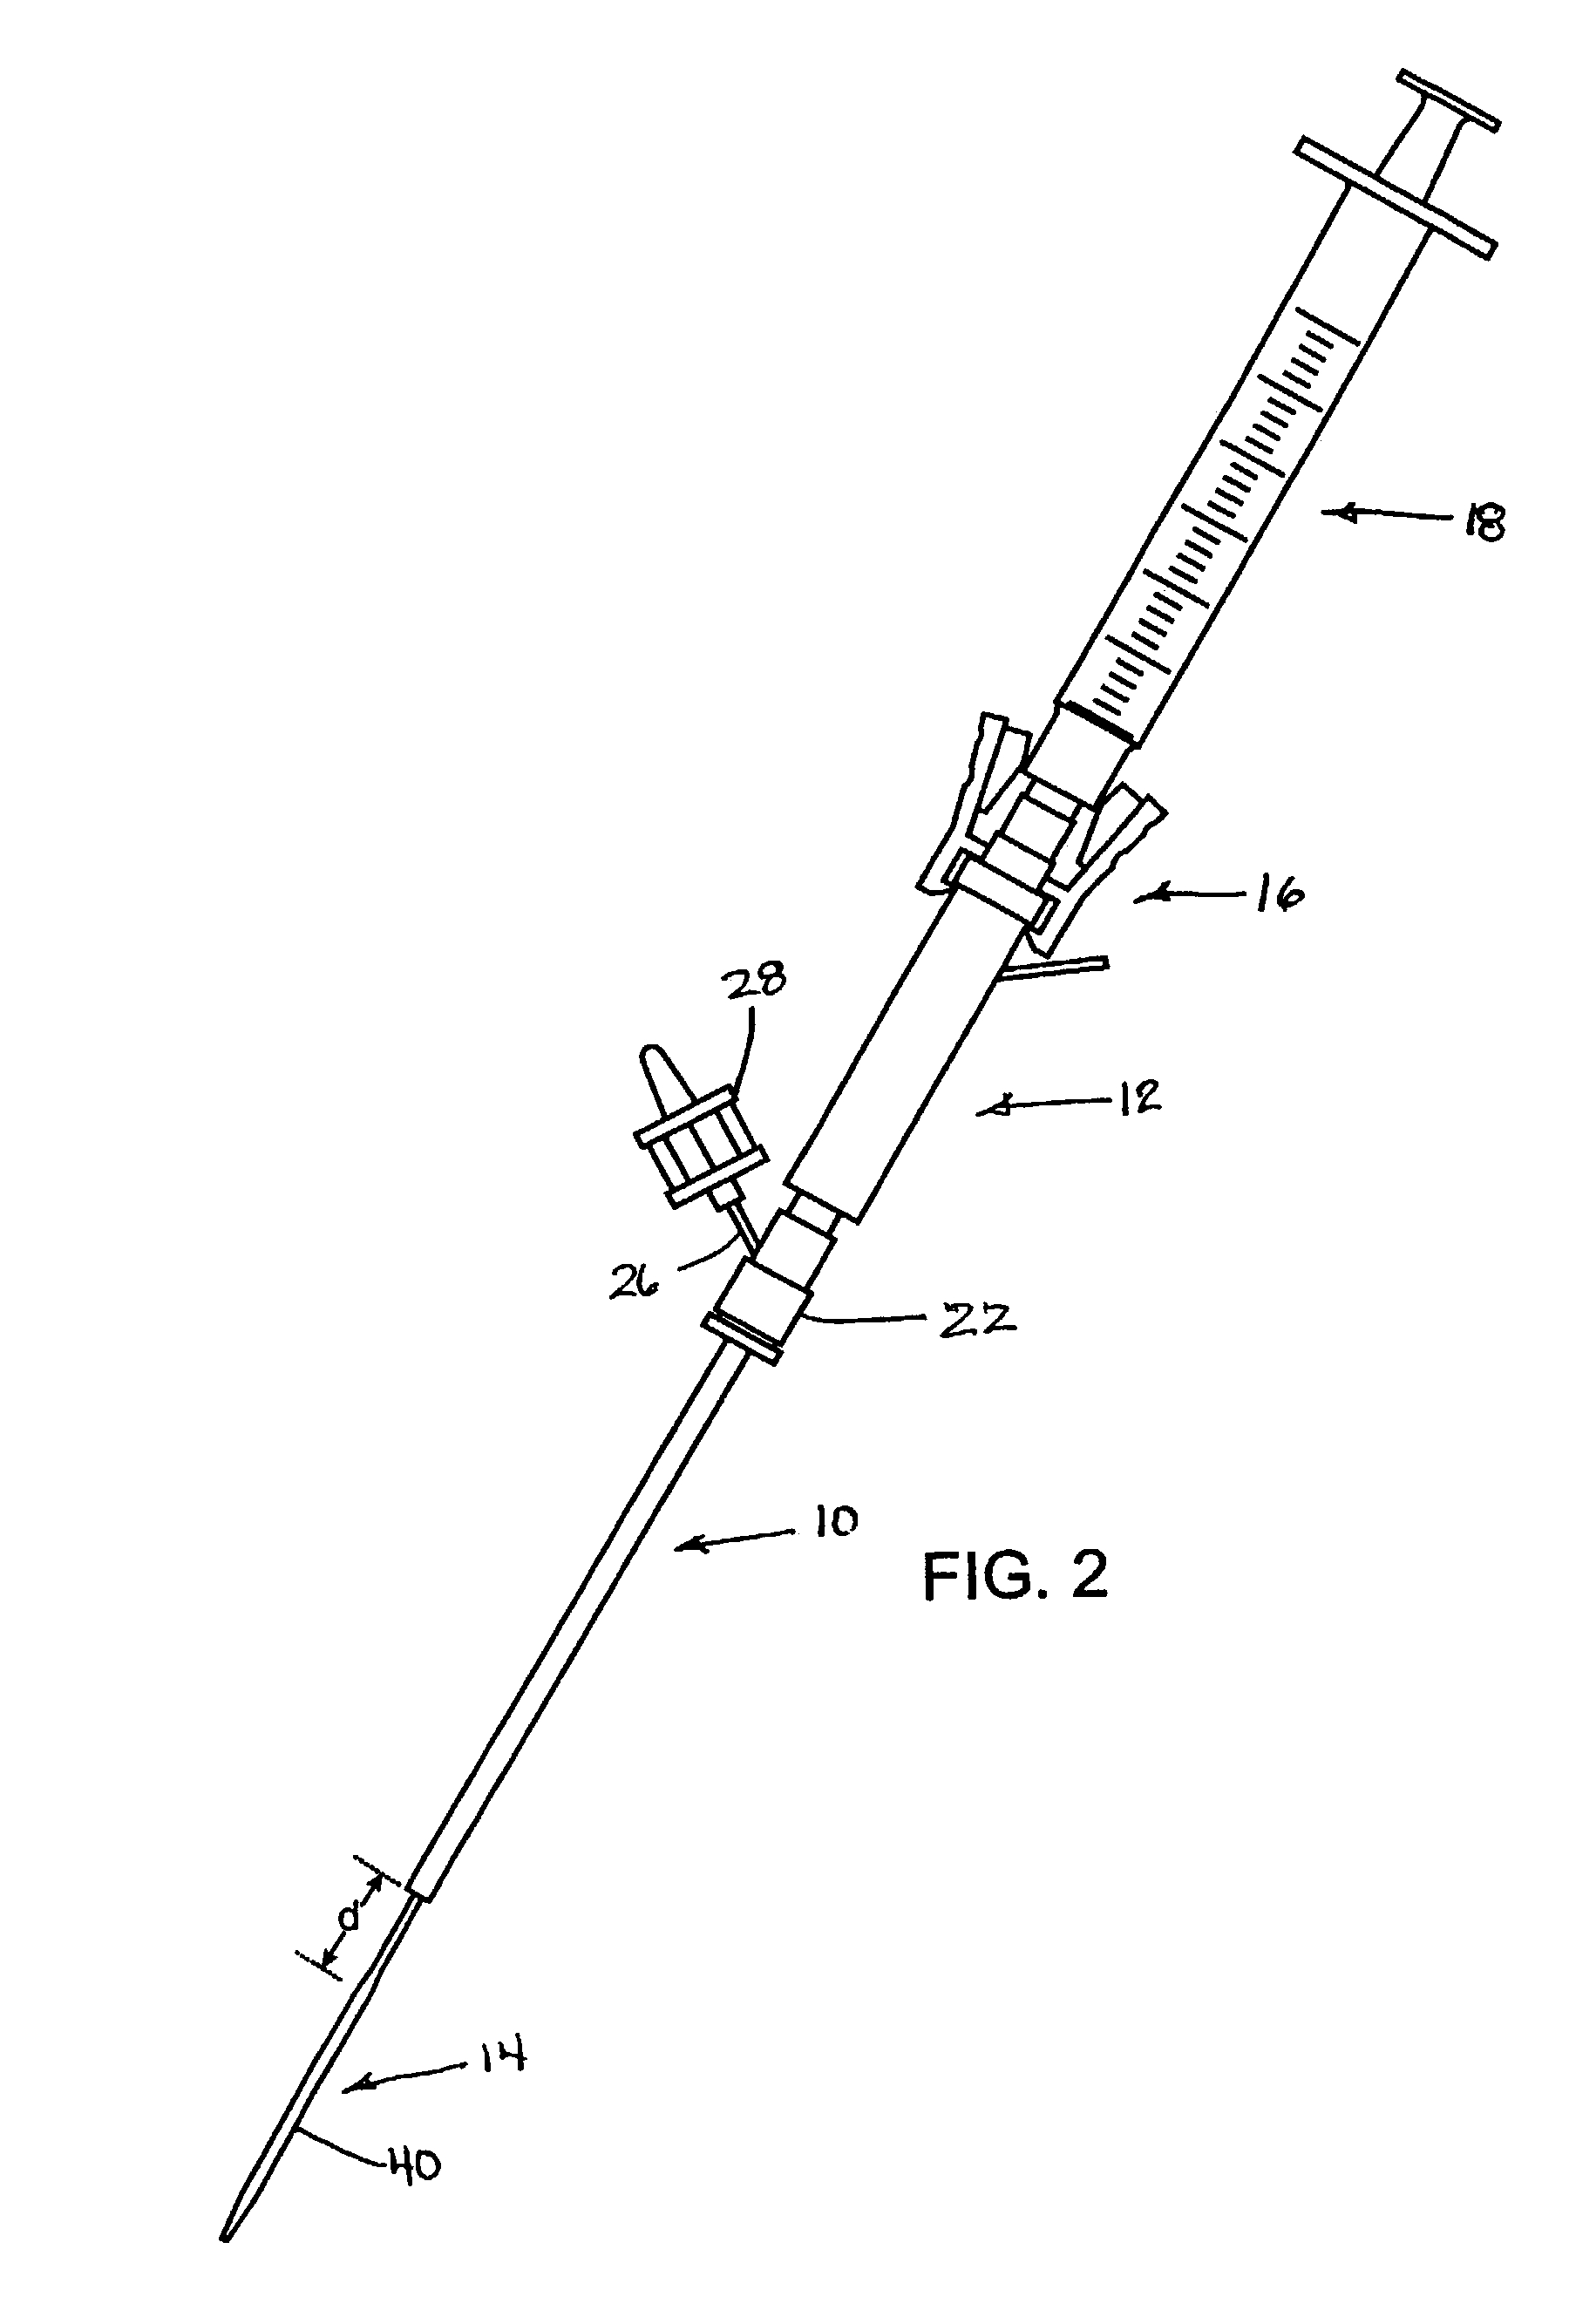 System and method for delivering hemostasis promoting material to a blood vessel puncture with a staging tube